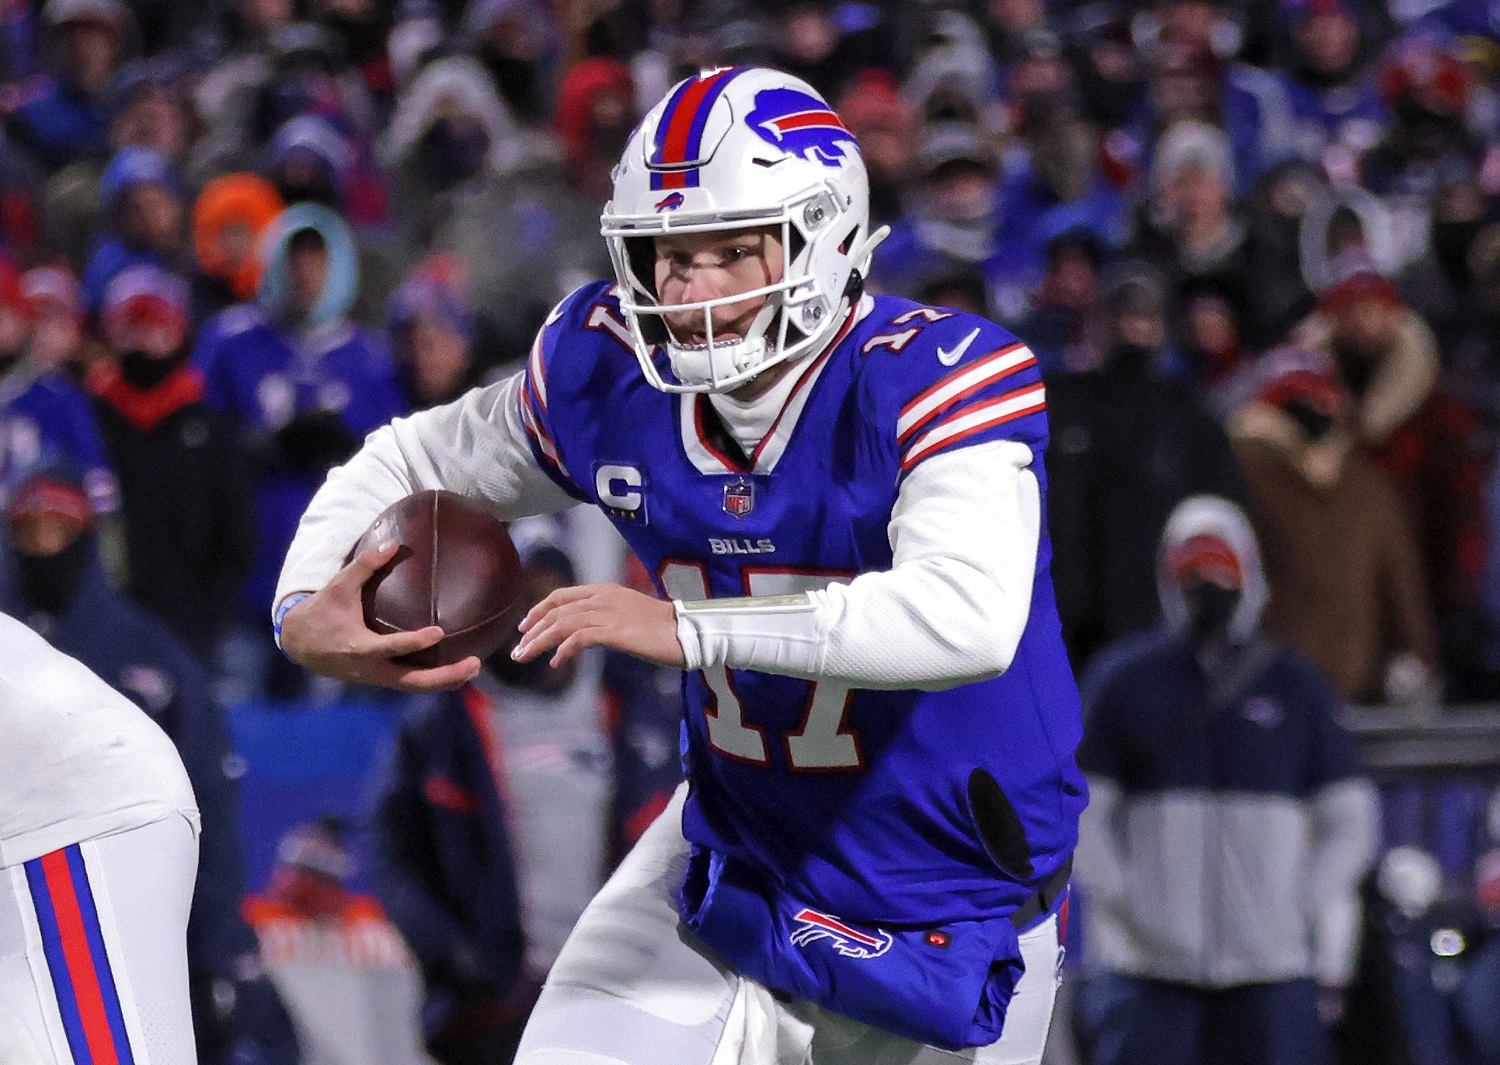 Josh Allen of the Buffalo Bills runs for a first down against the New England Patriots during the first quarter in the AFC Wild Card Game at Highmark Stadium on Jan. 15, 2022, in Orchard Park, New York.